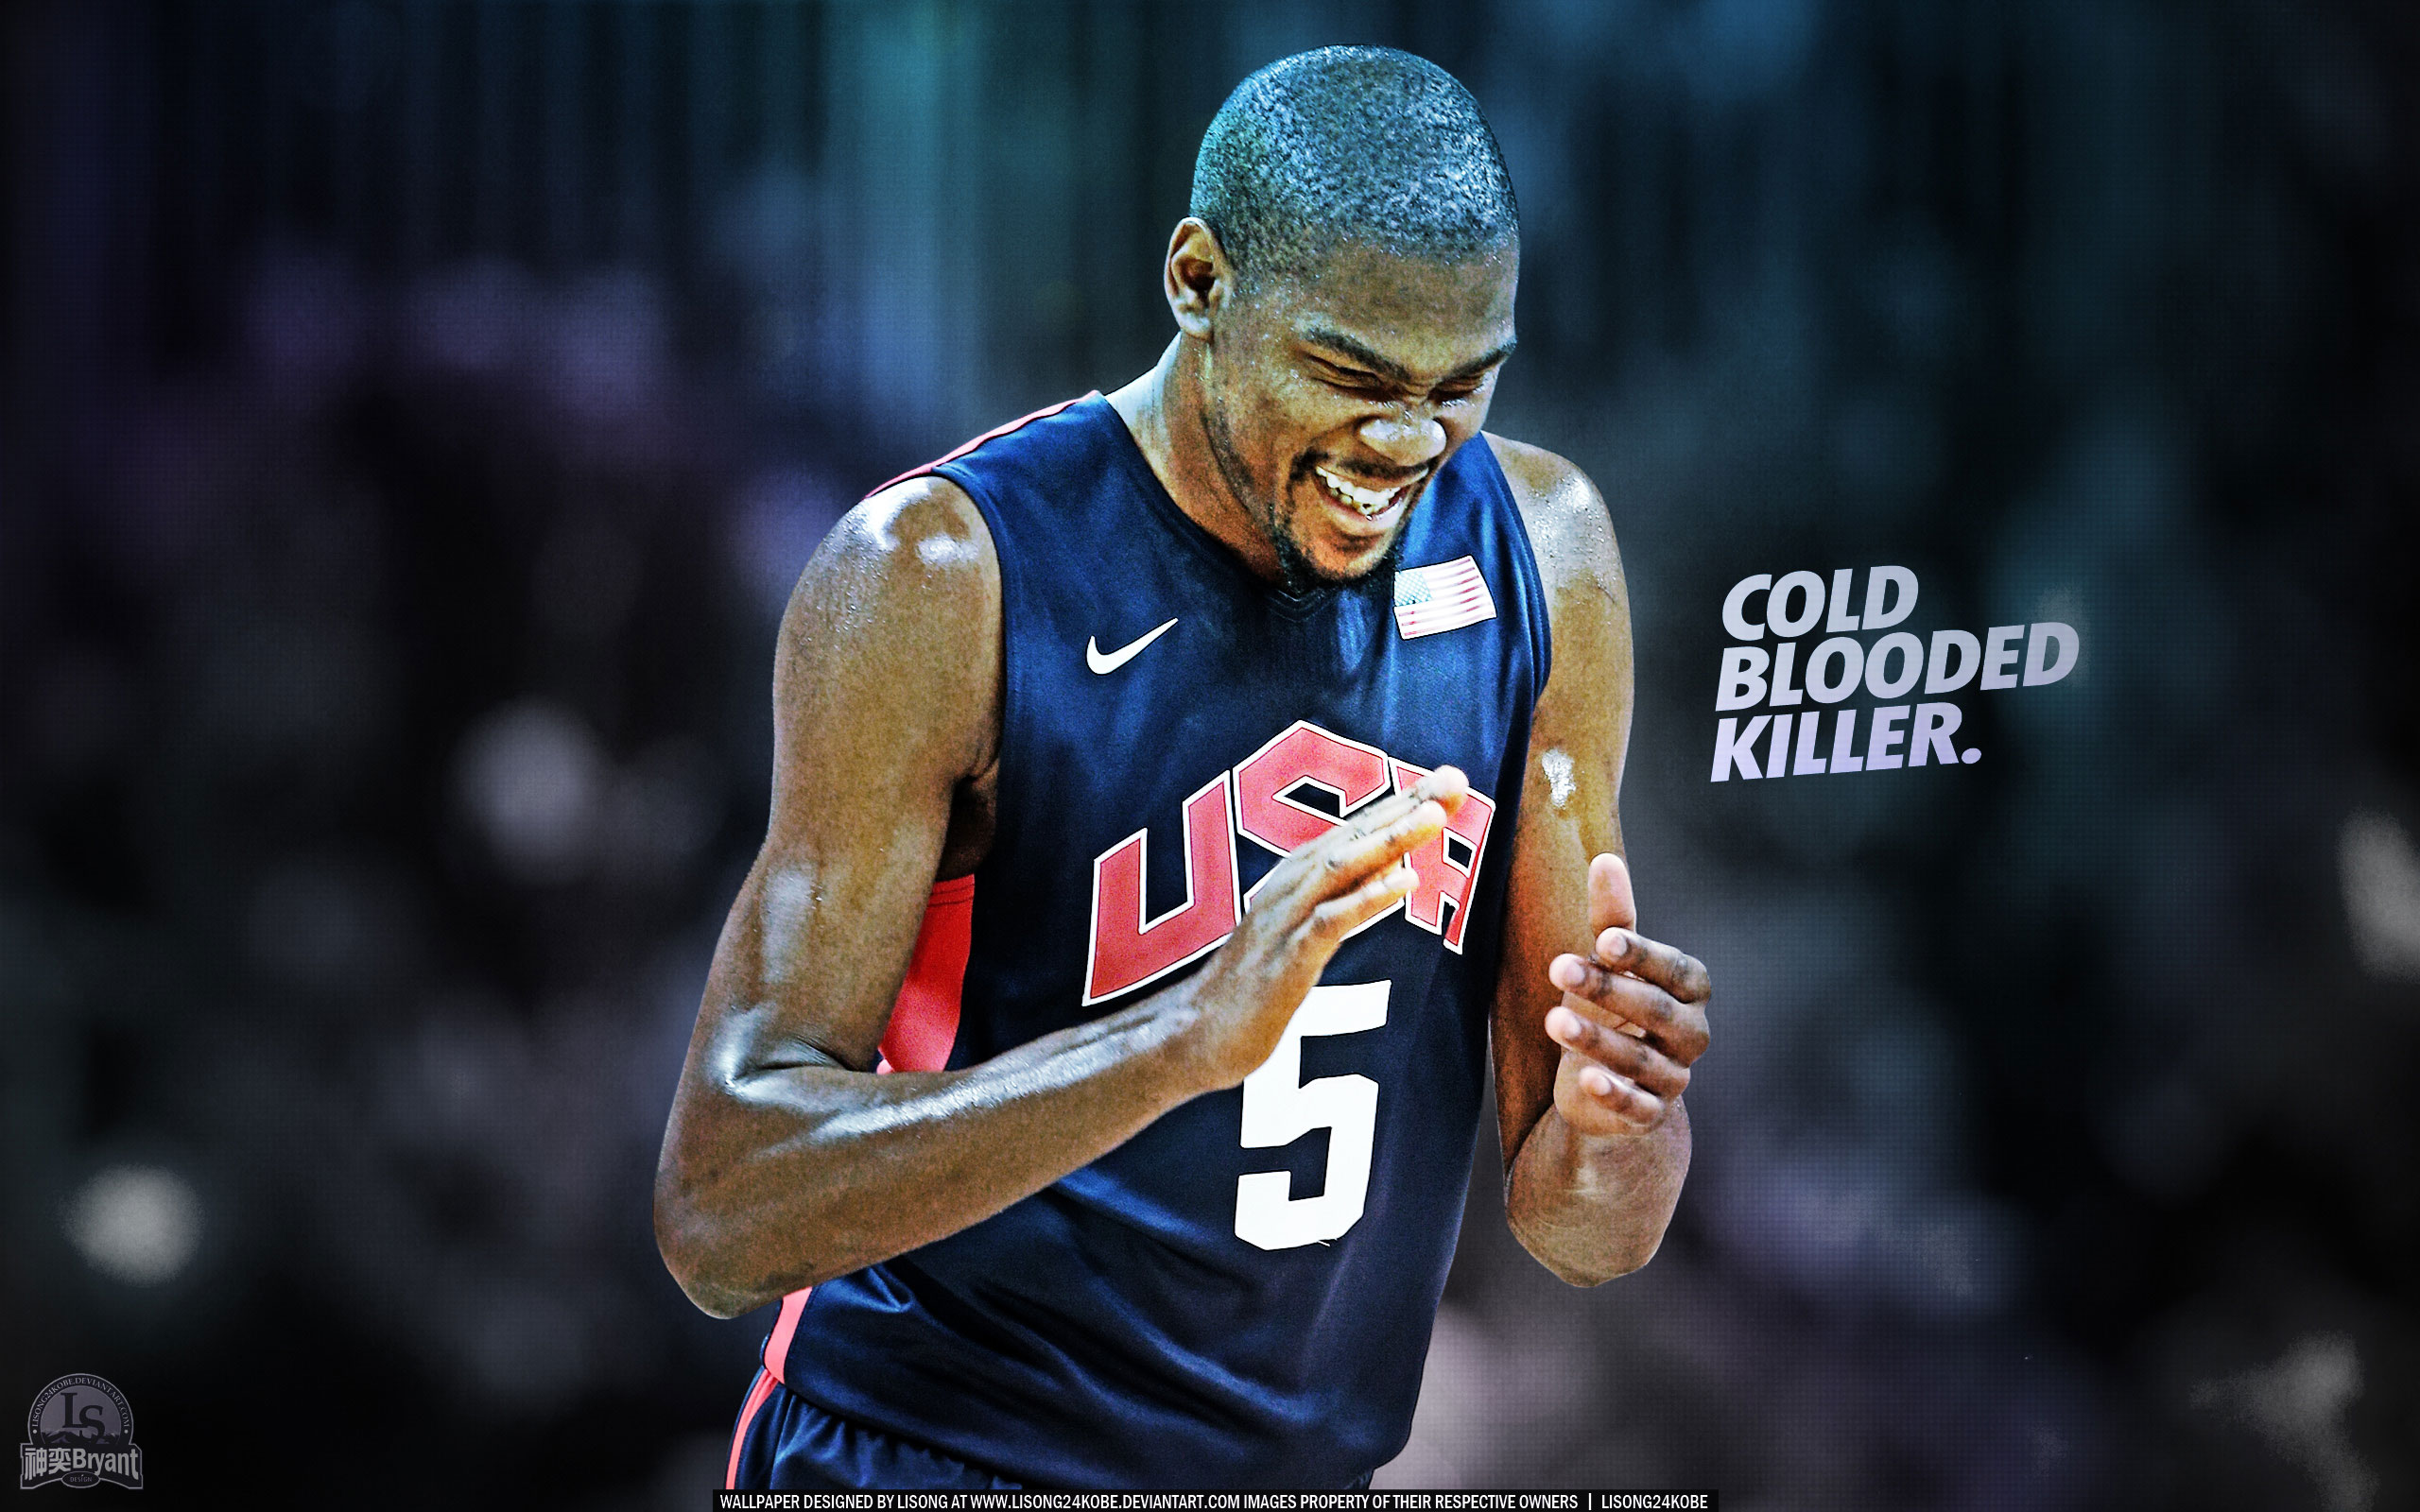 Wallpaper Of Kd Quotes